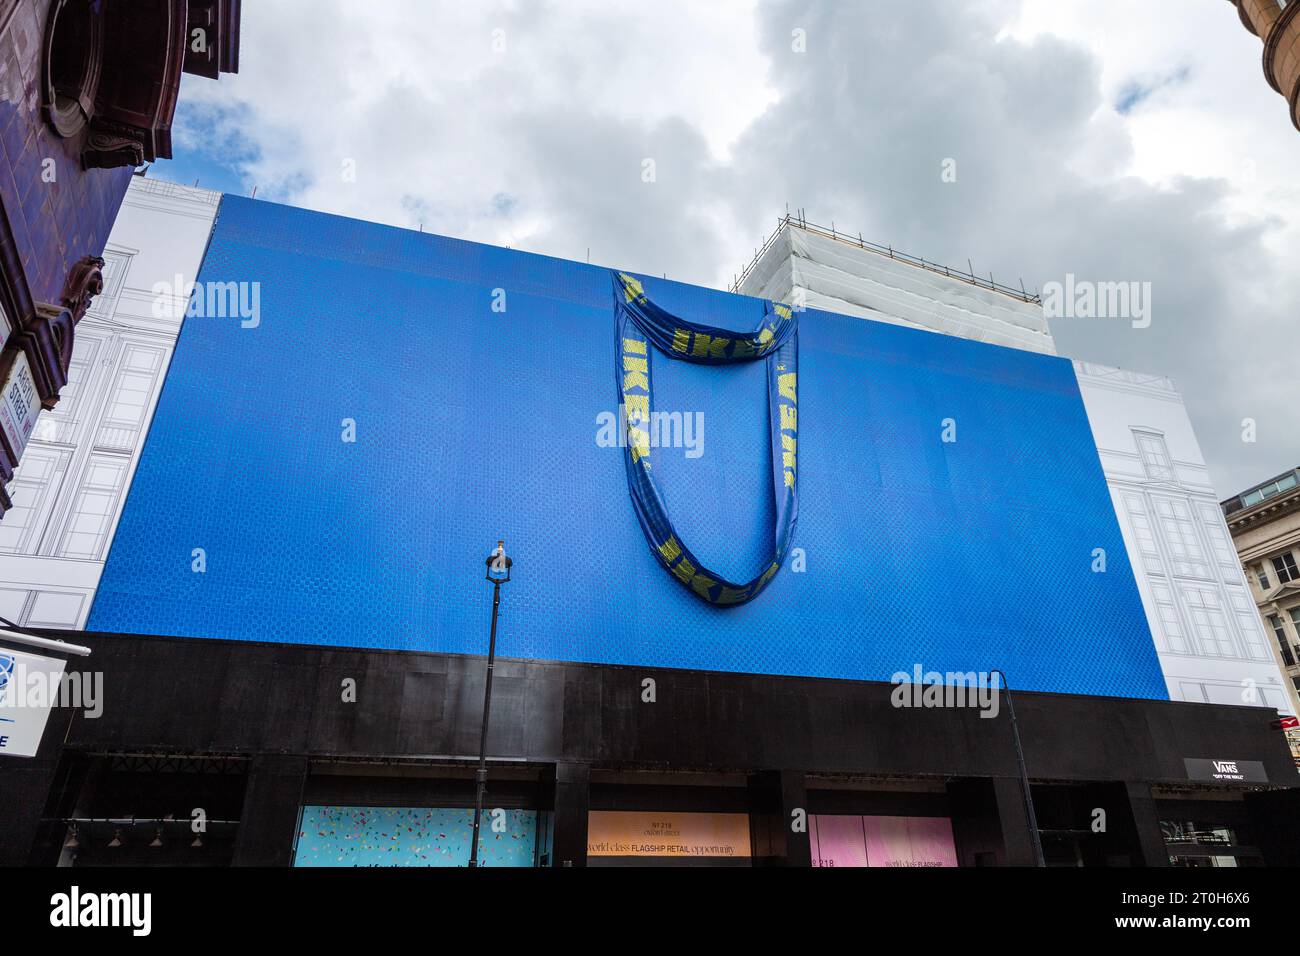 Blue Ikea Frakta bag on the facade of the upcoming Oxford Street Ikea store, at previous location of Topshop flagship store, London, England Stock Photo